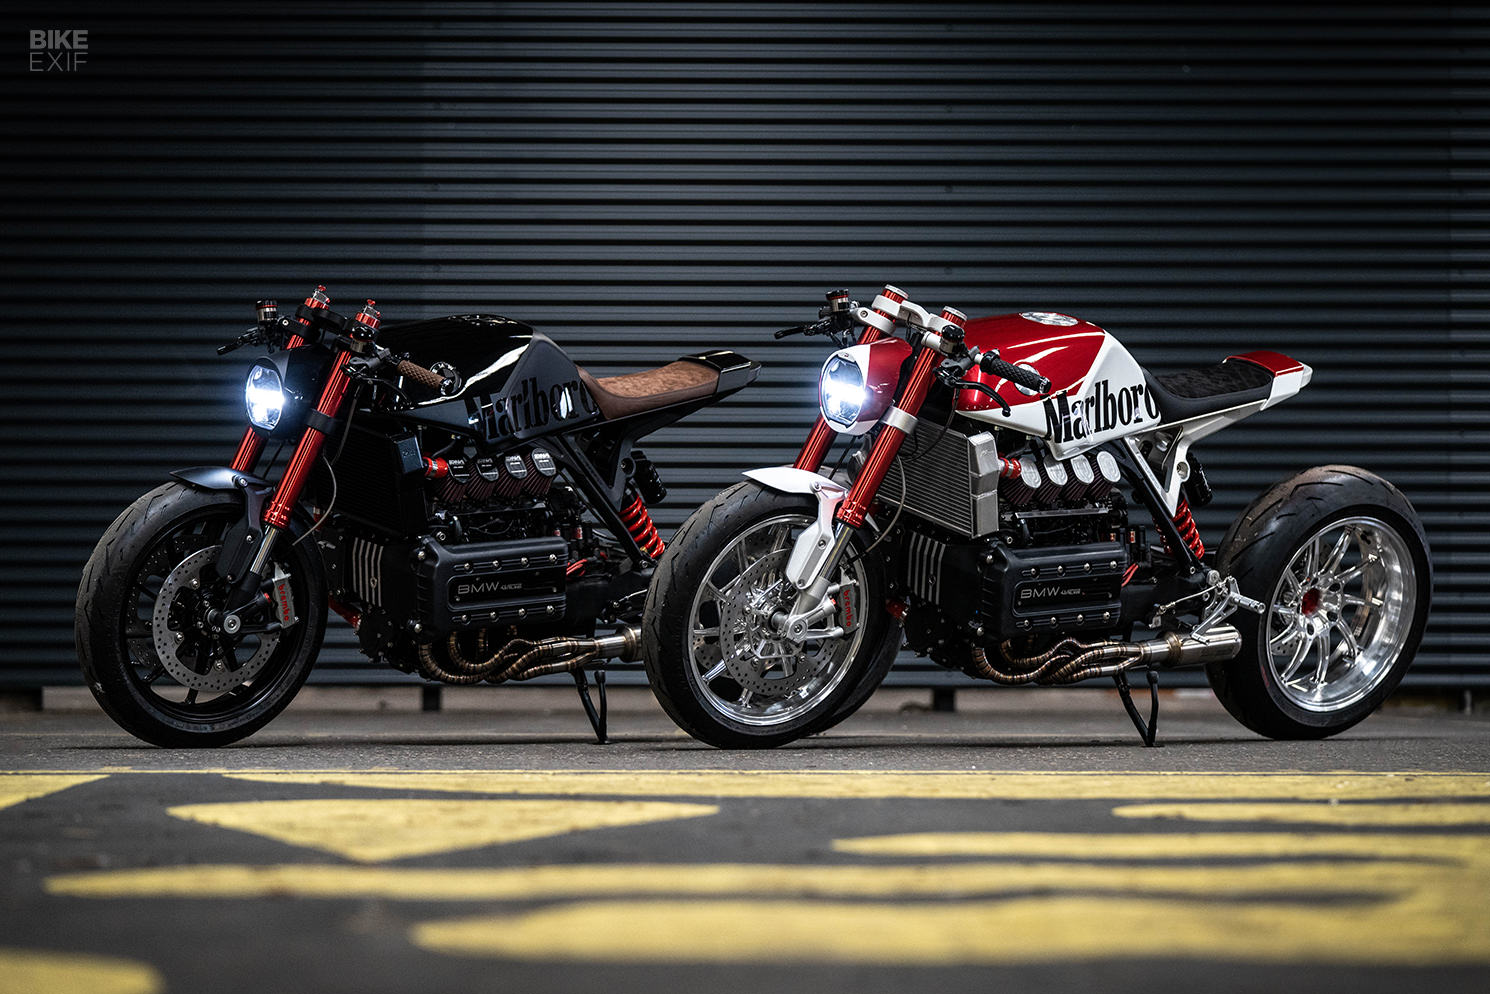 Two Smoking Hot Bmw K1100Rs Café Racers From Powerbrick | Bike Exif